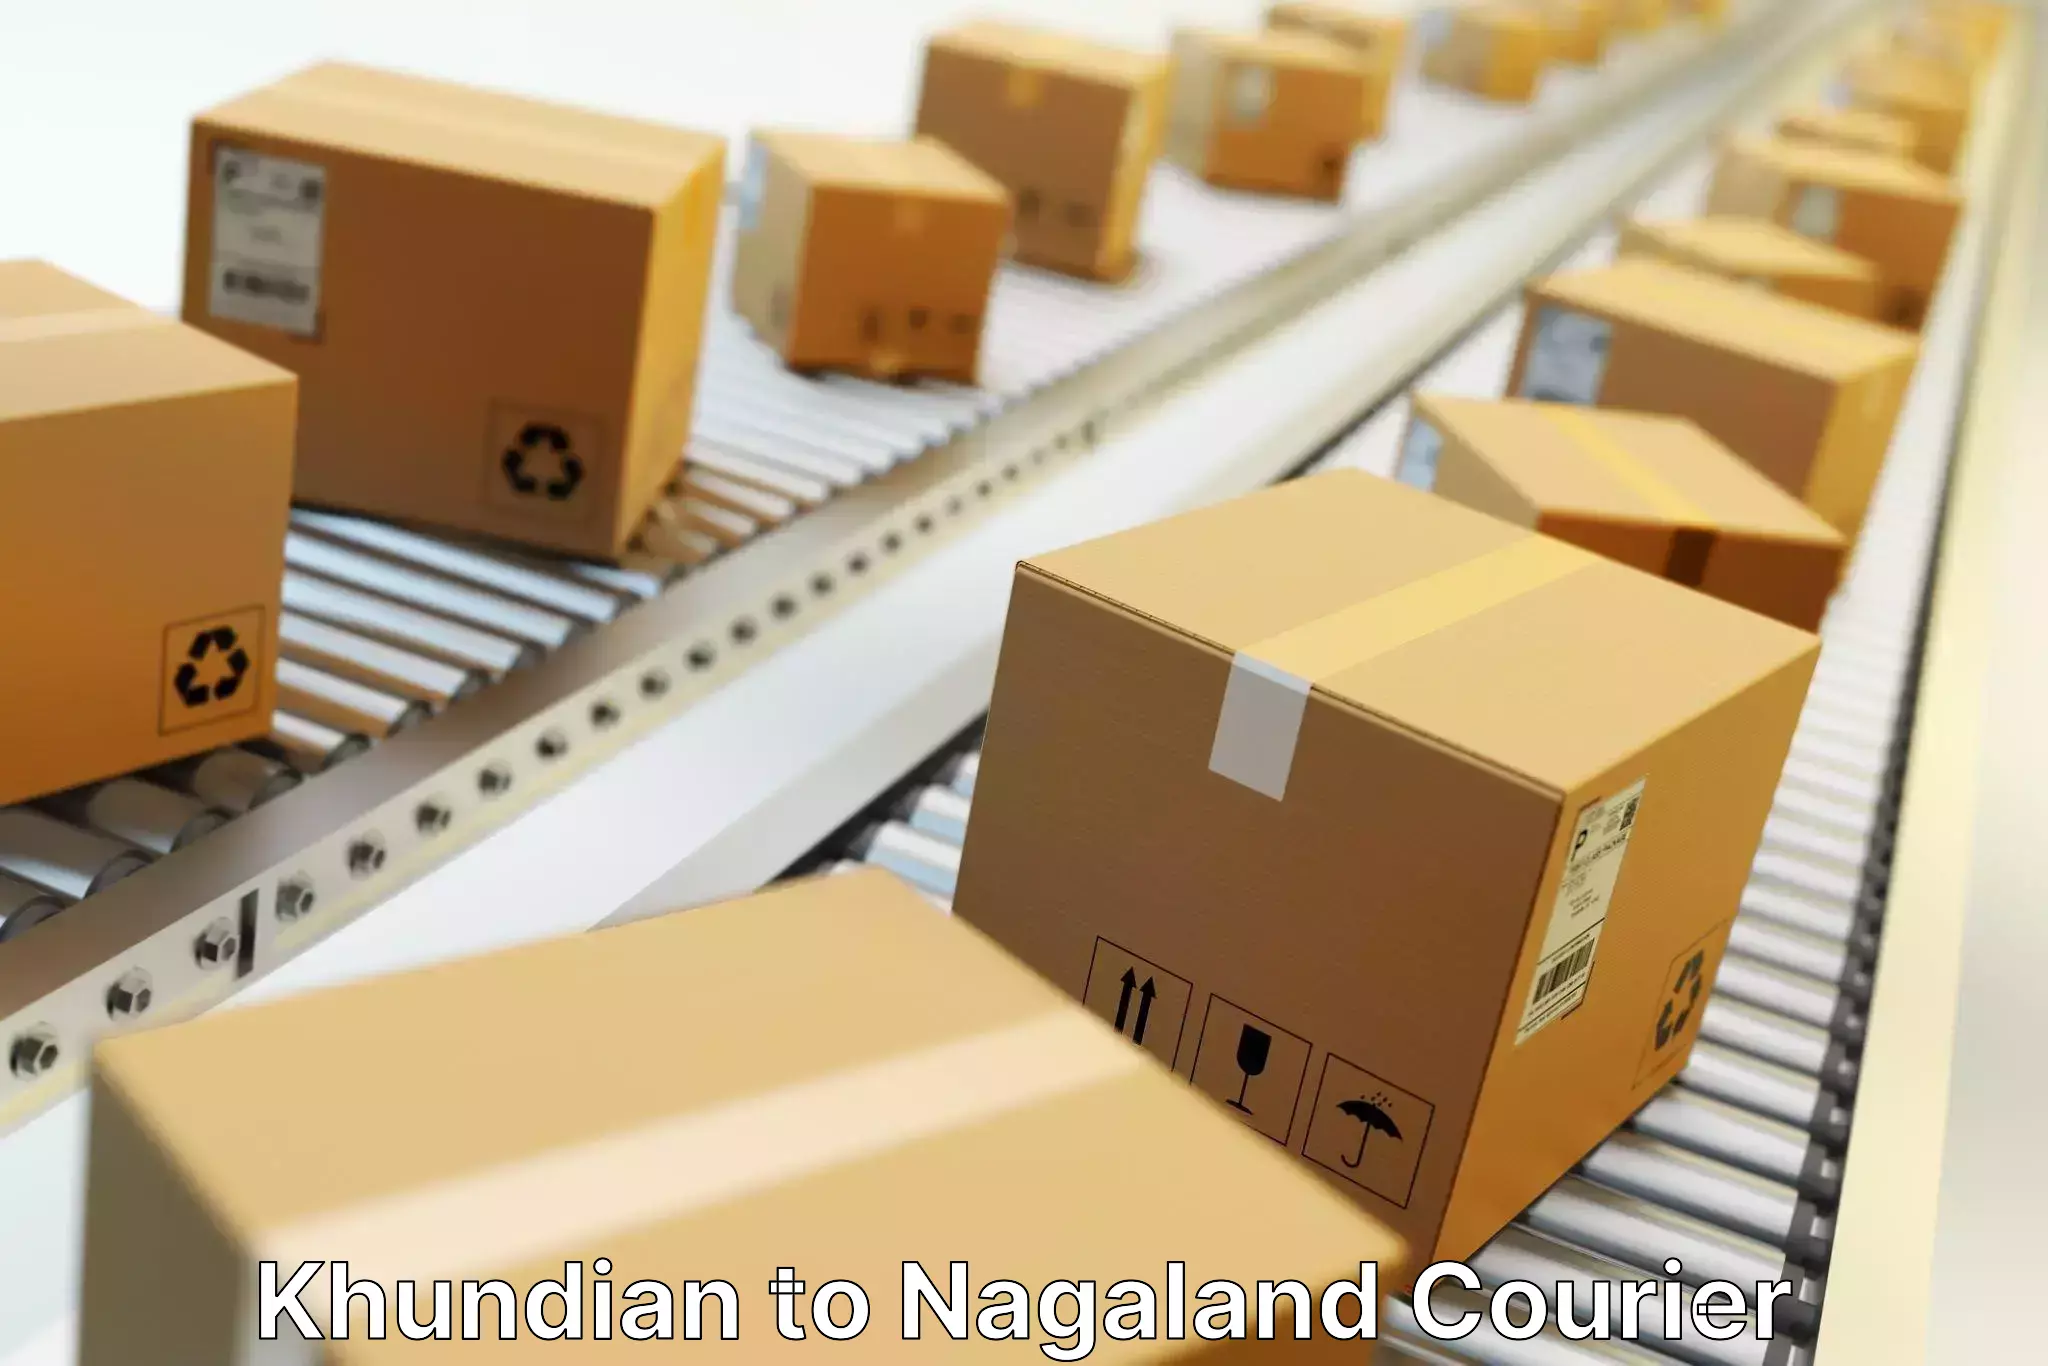 State-of-the-art courier technology Khundian to NIT Nagaland